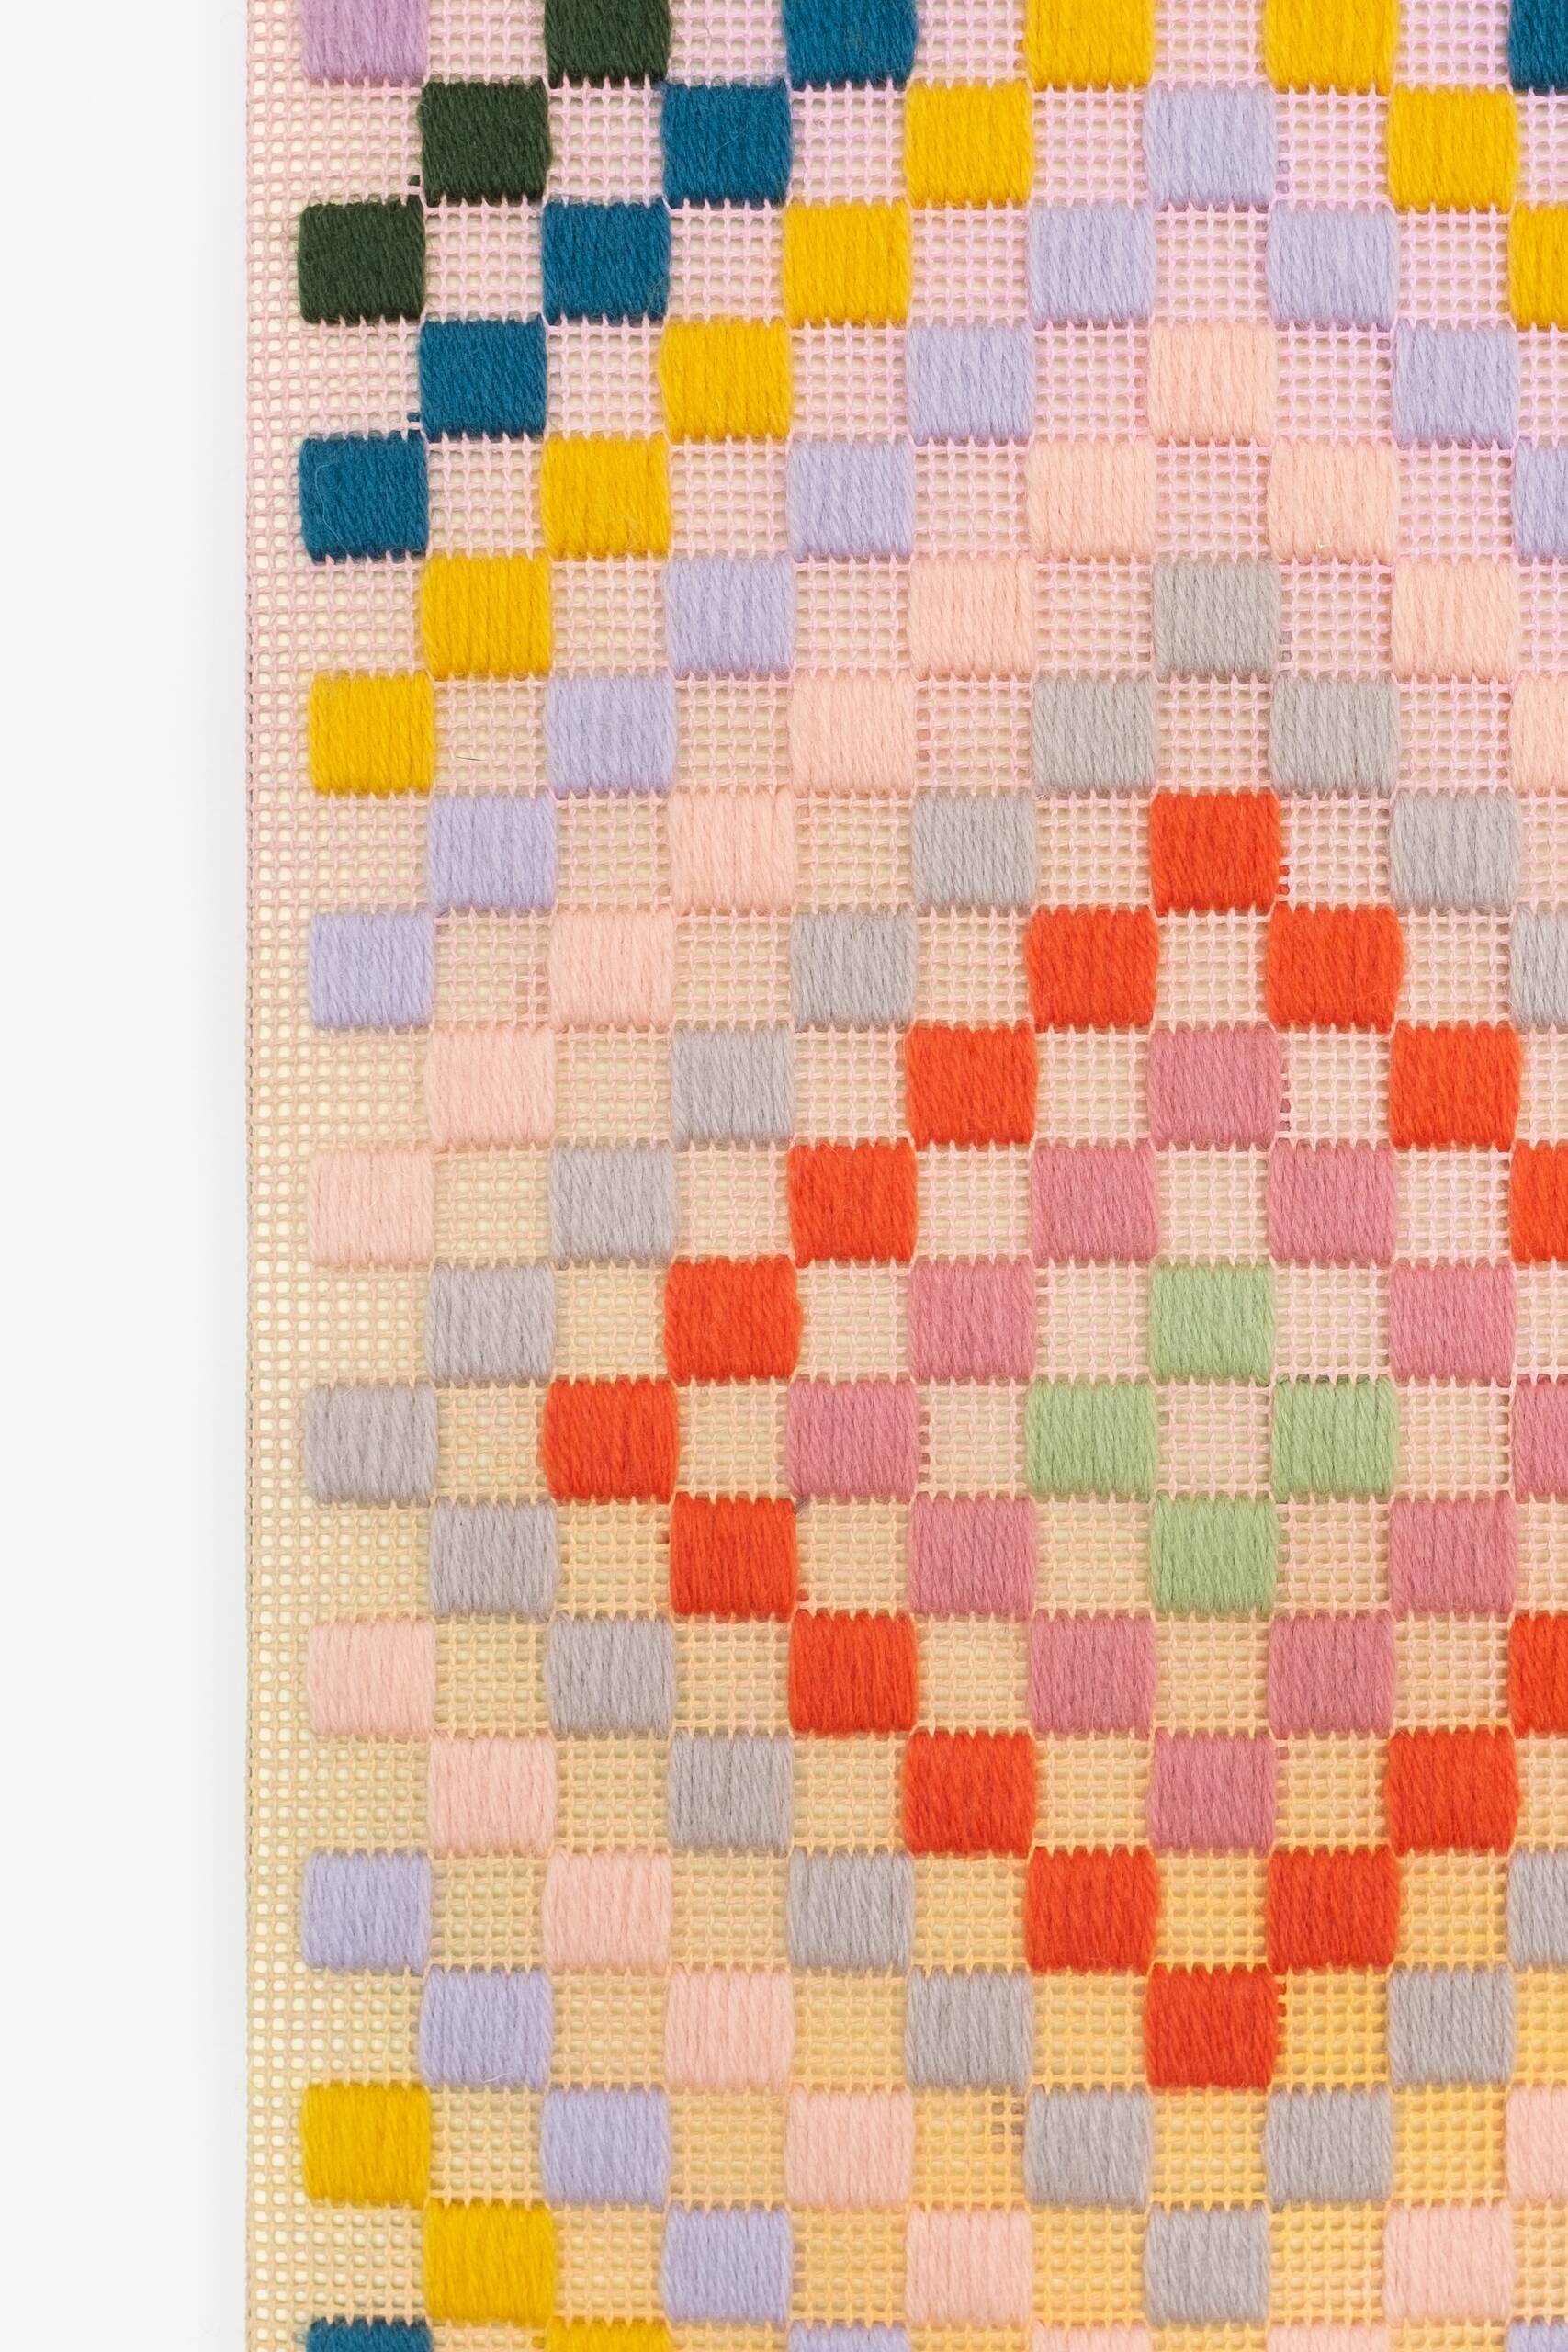 Punch card -- Patchwork [blue], Hand-embroidered wool yarn and acrylic paint on canvas, 2022